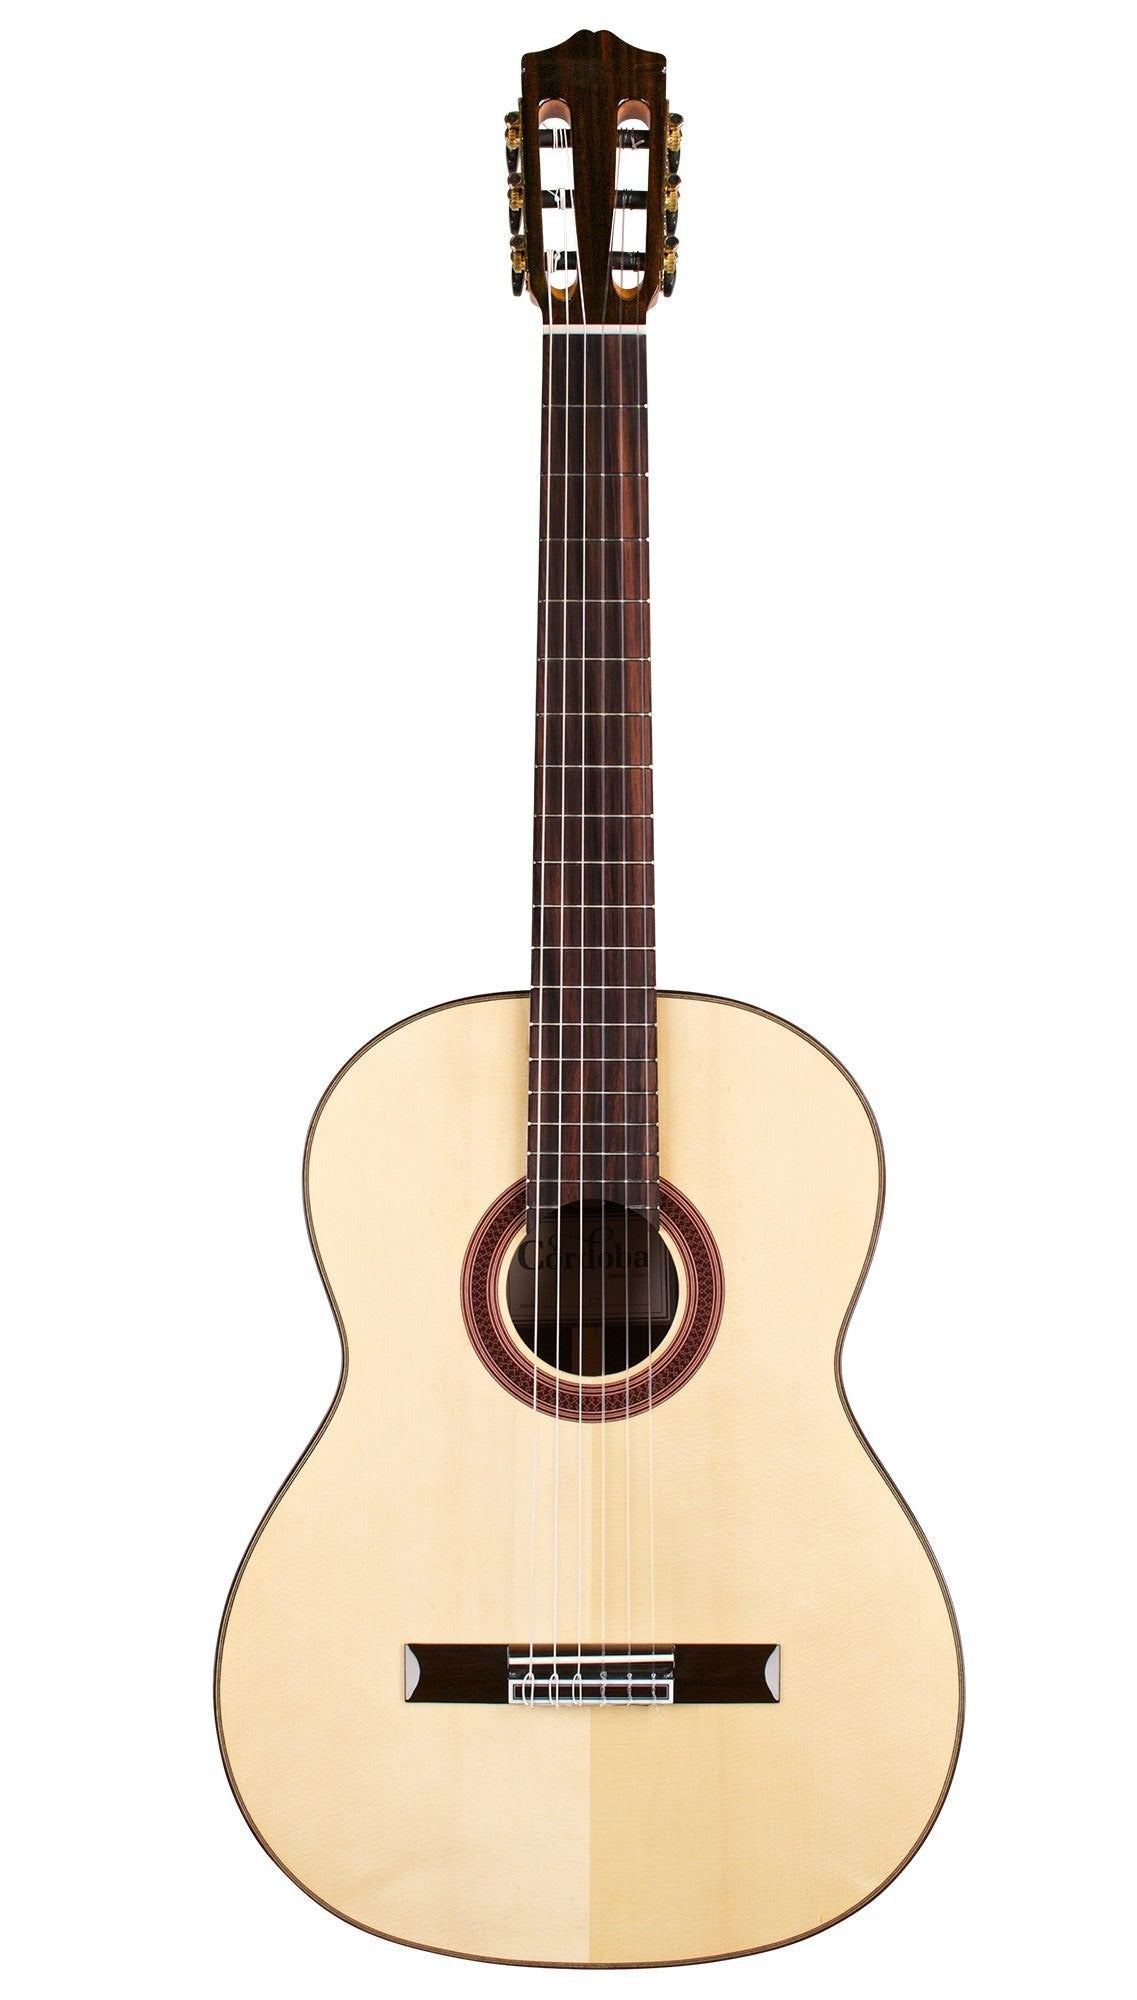 Cordoba C7 SP - Solid Spruce Top Classical